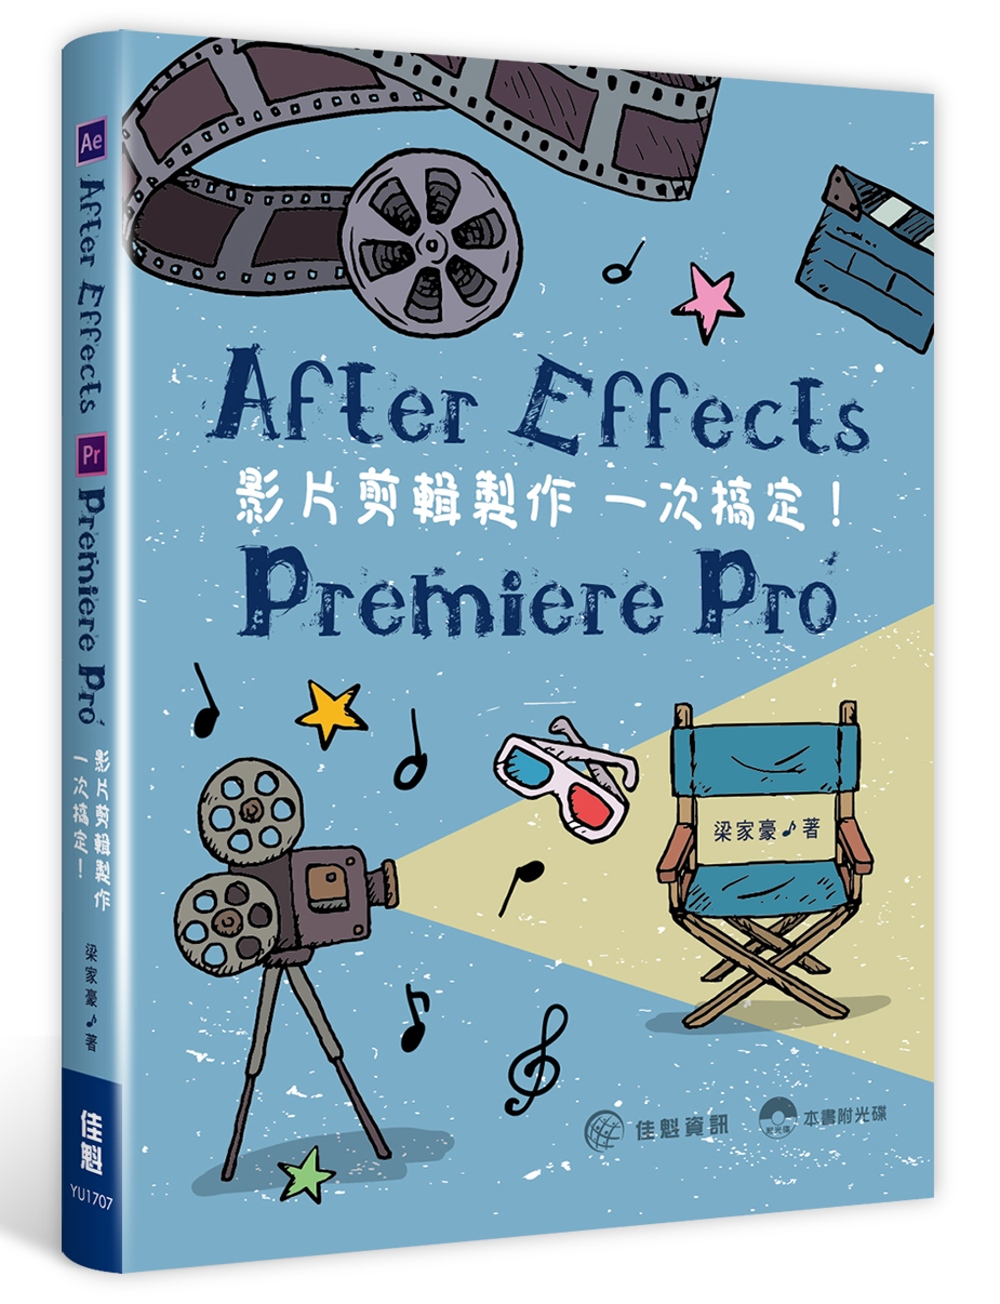 After Effects．Premiere Pro：影片剪...